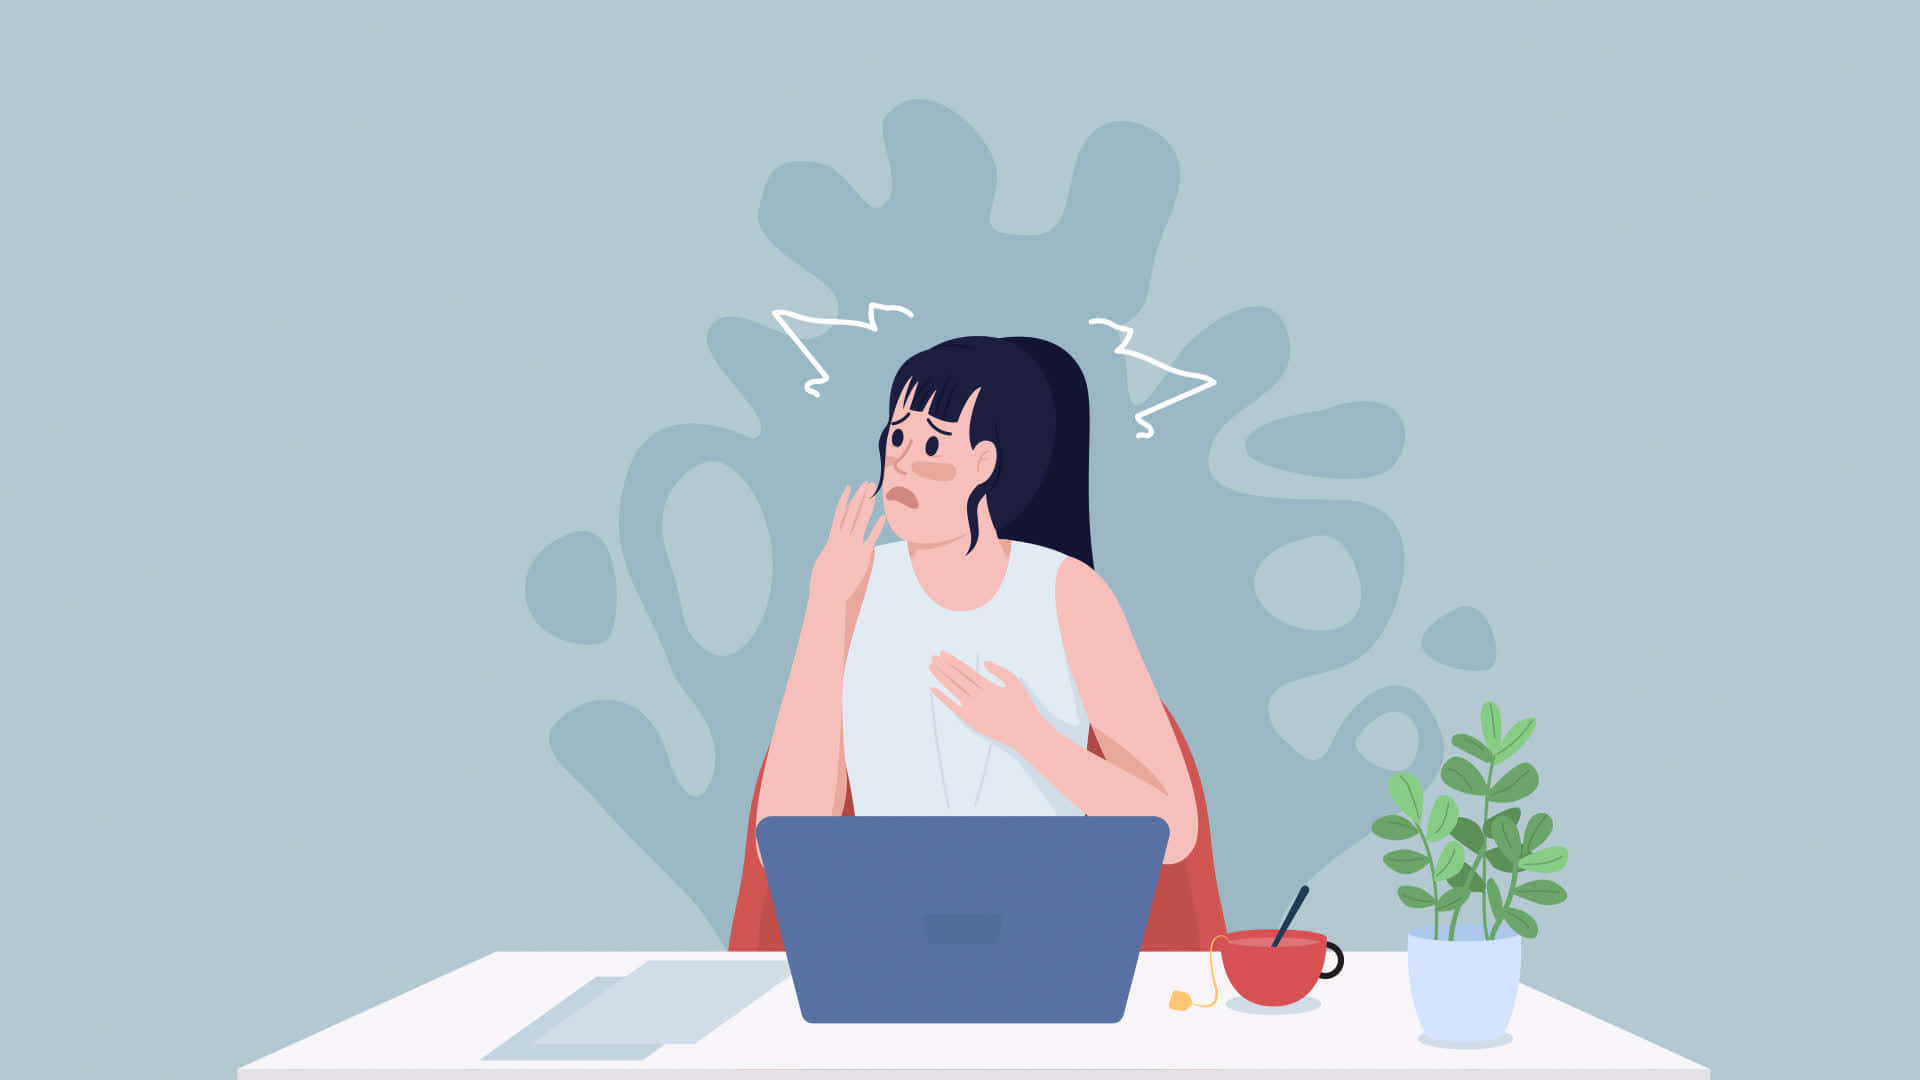 Stress Depicted In An Illustration Wallpaper